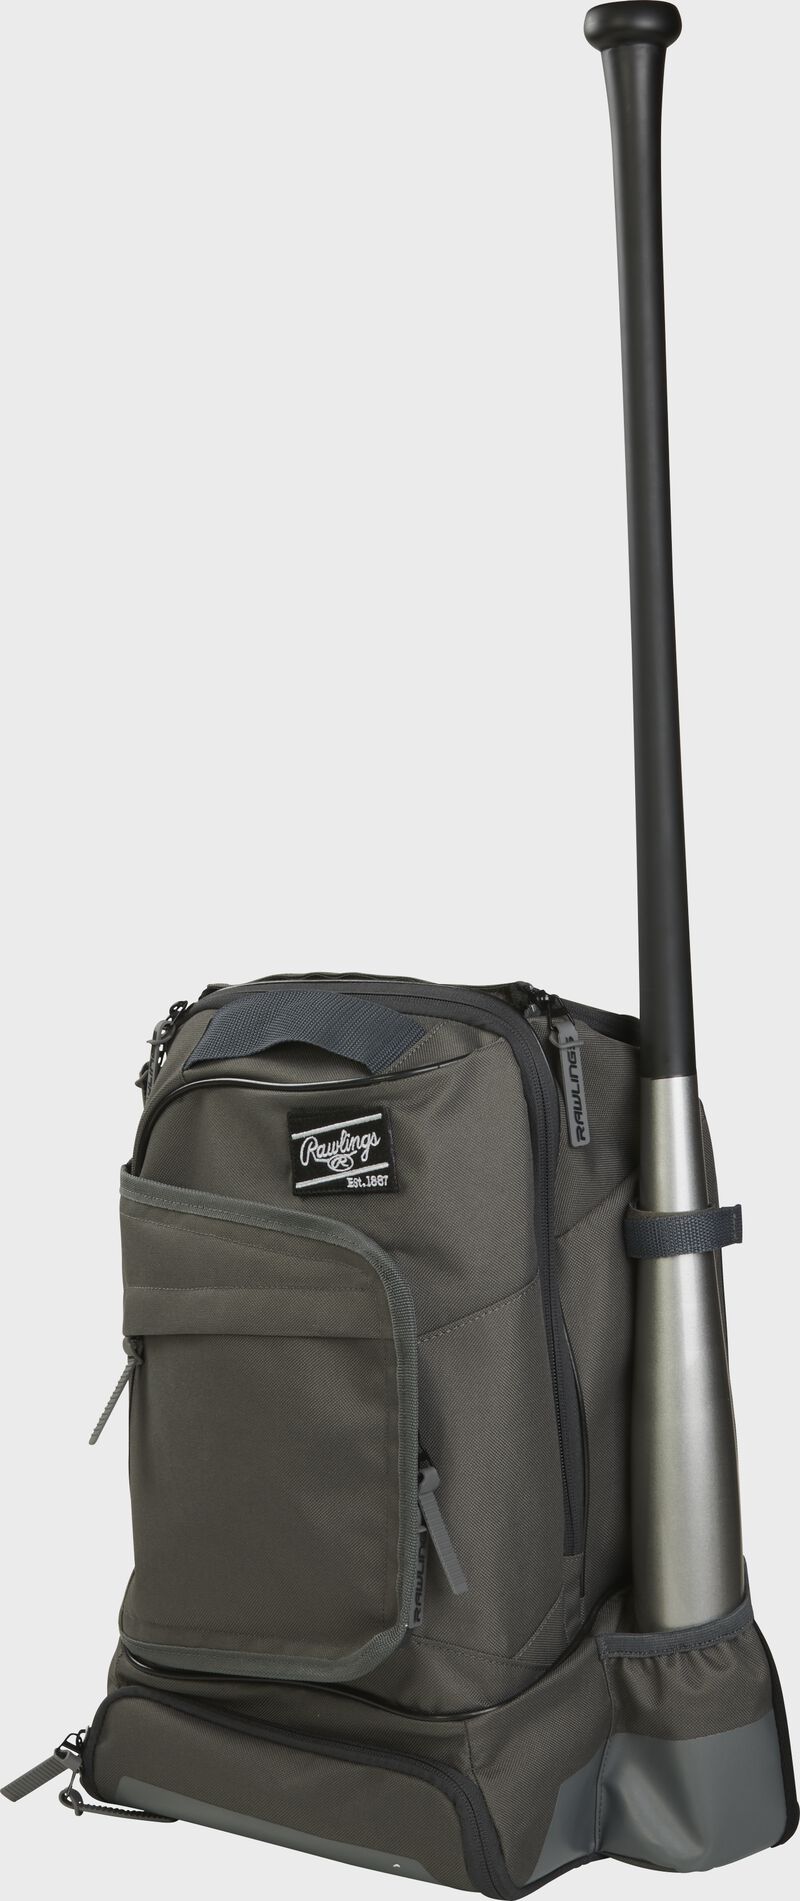 Front left-side view of Rawlings Training Backpack - SKU: R701 image number null